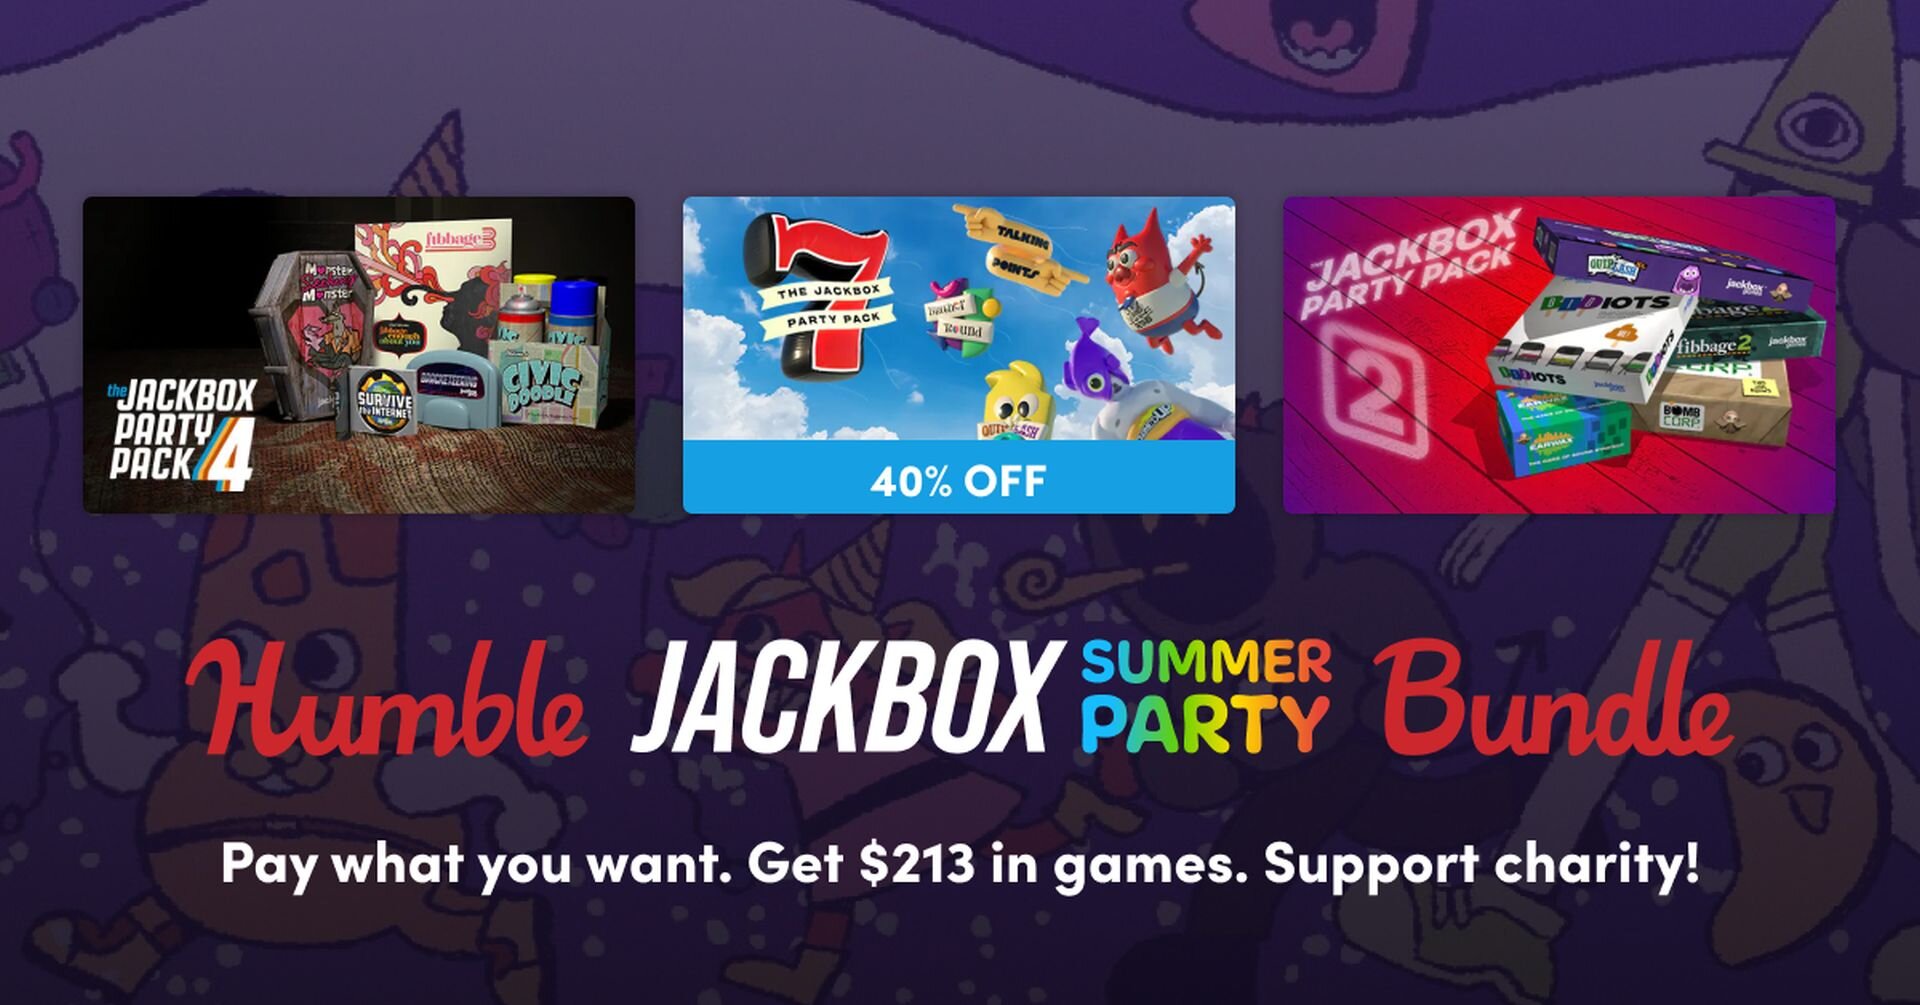 The Jackbox Party Pack. The Jackbox Party Pack 5 Мак. The Jackbox Party Pack 3. The Jackbox Party Pack 10. The jackbox party русификатор